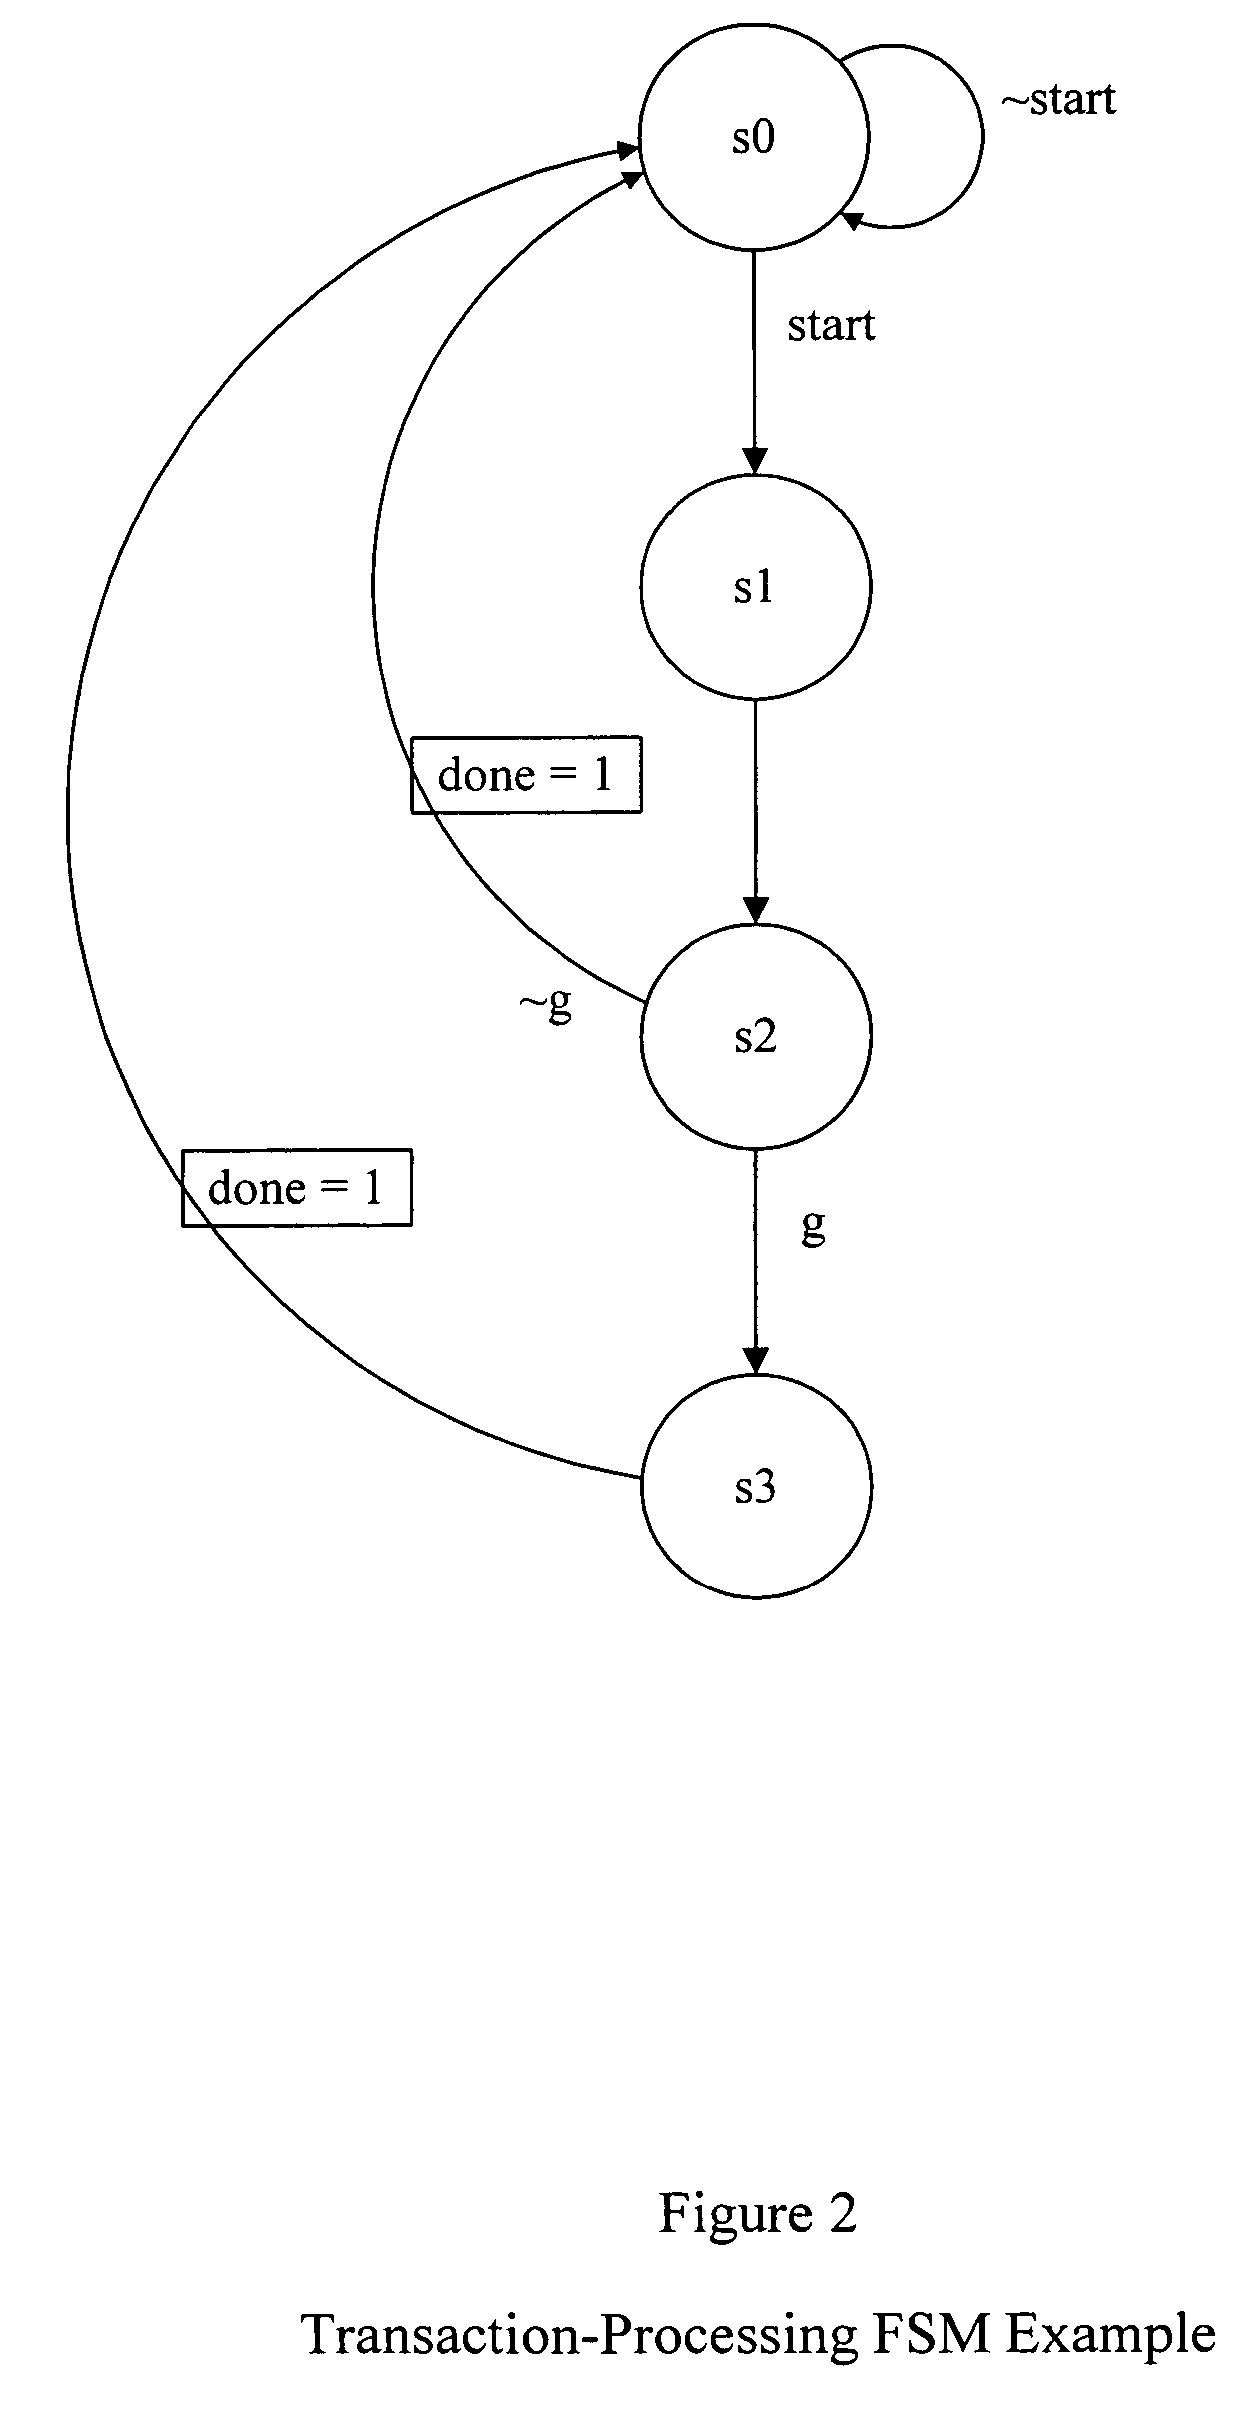 Transaction-based system and method for abstraction of hardware designs